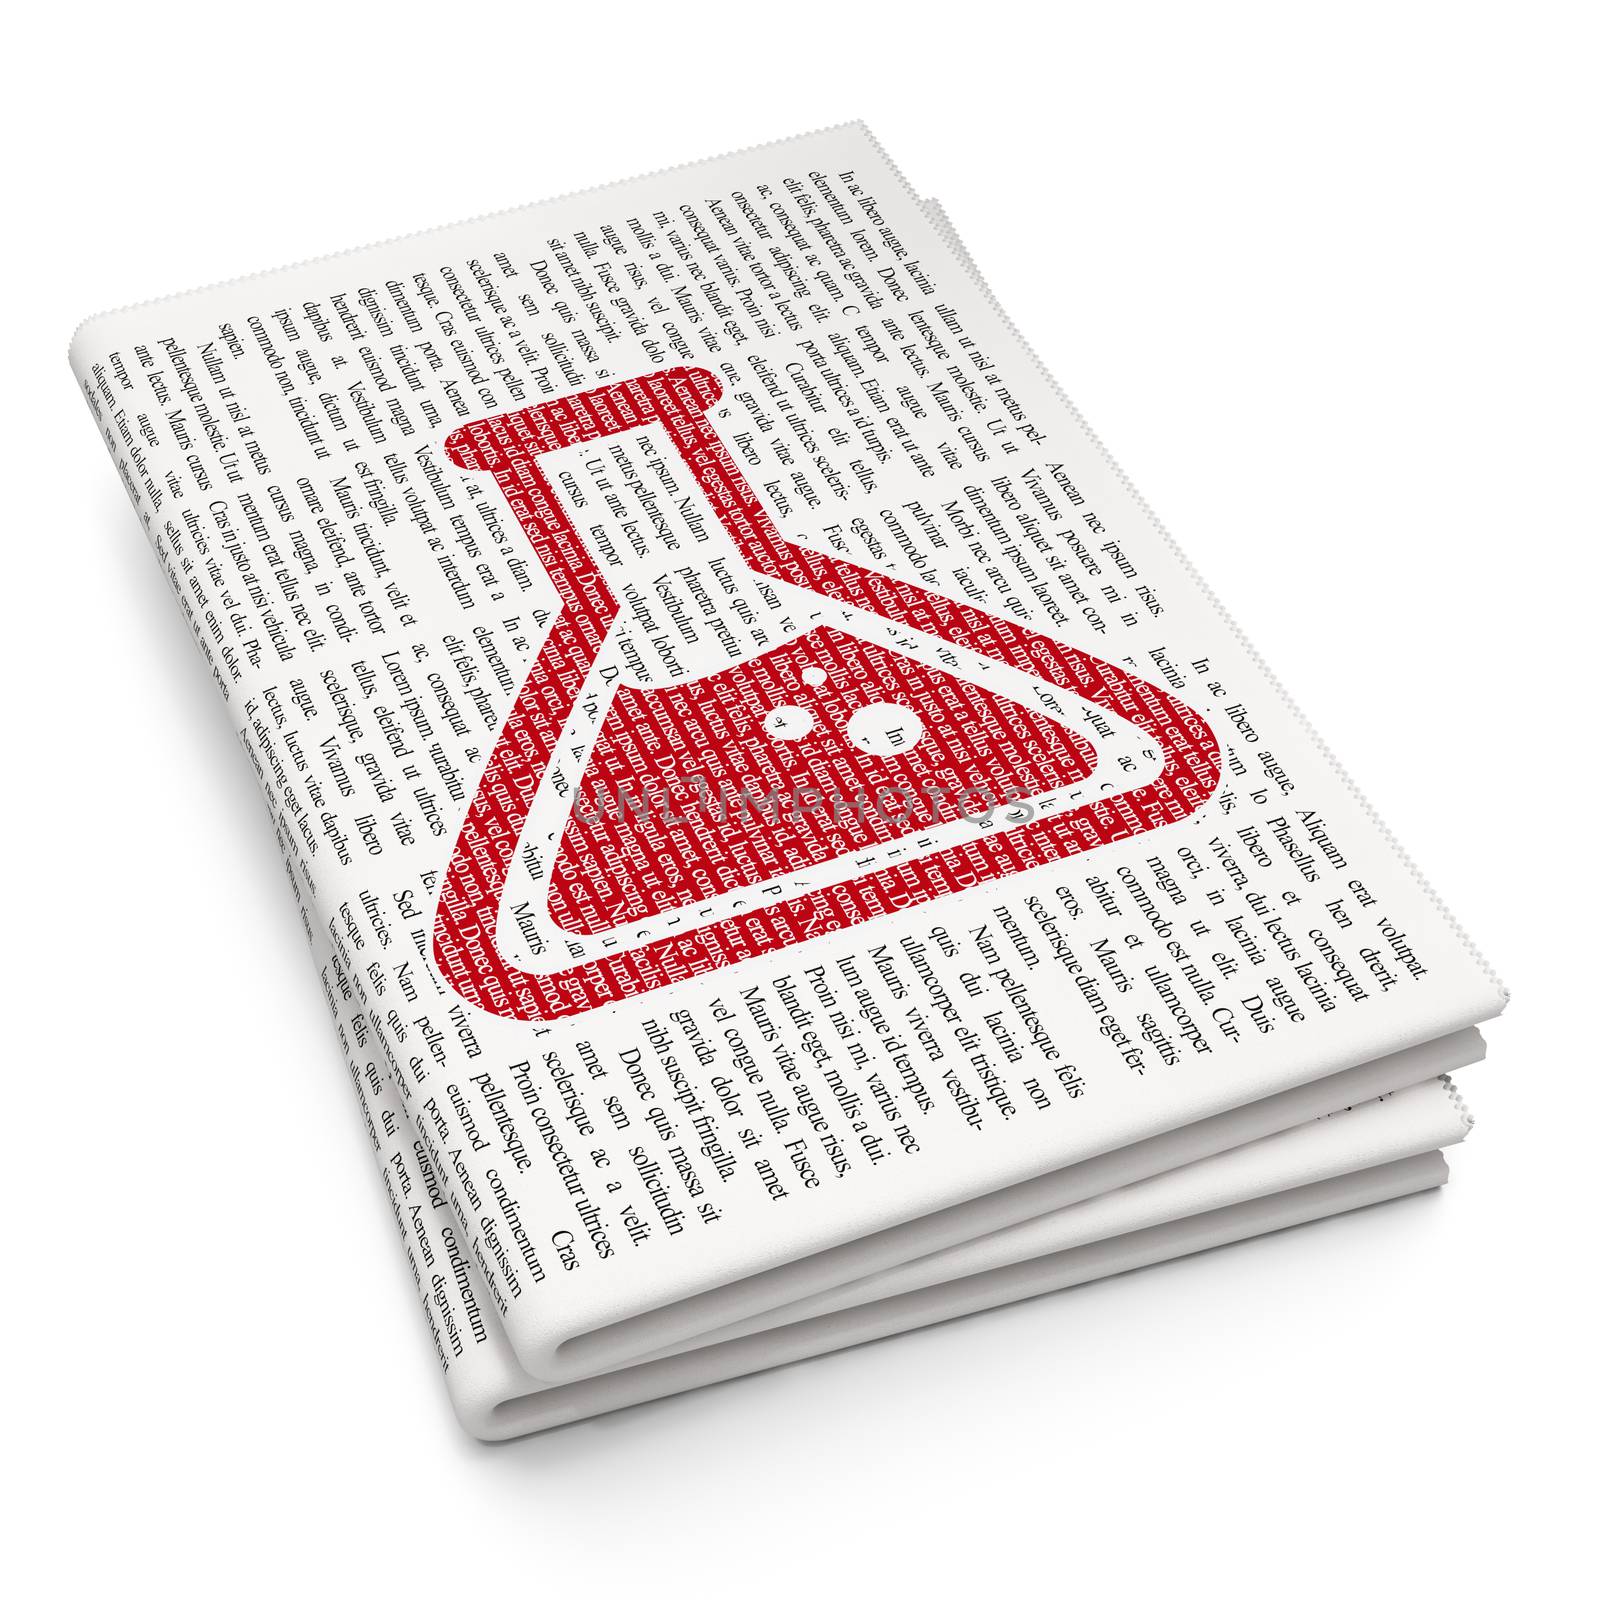 Science concept: Pixelated red Flask icon on Newspaper background, 3D rendering